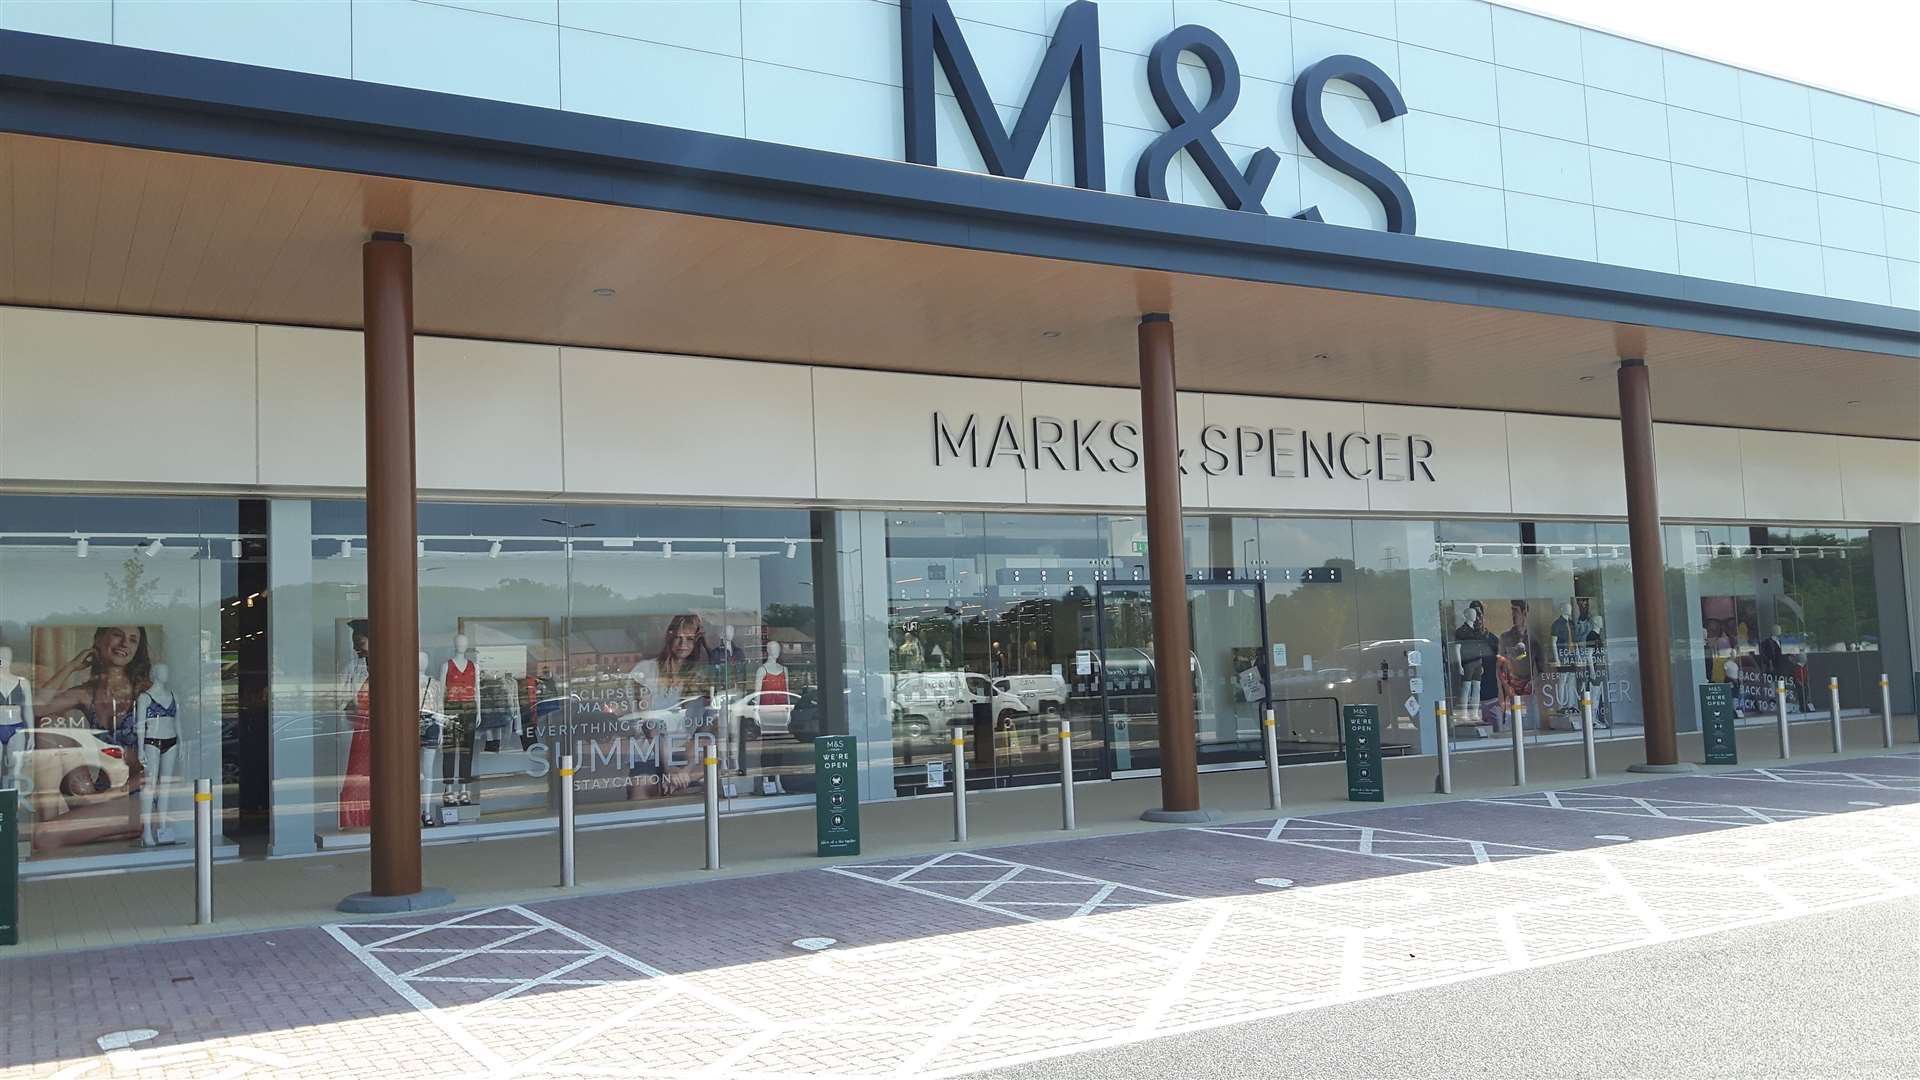 The frontage of the M&S store at Eclipse Park